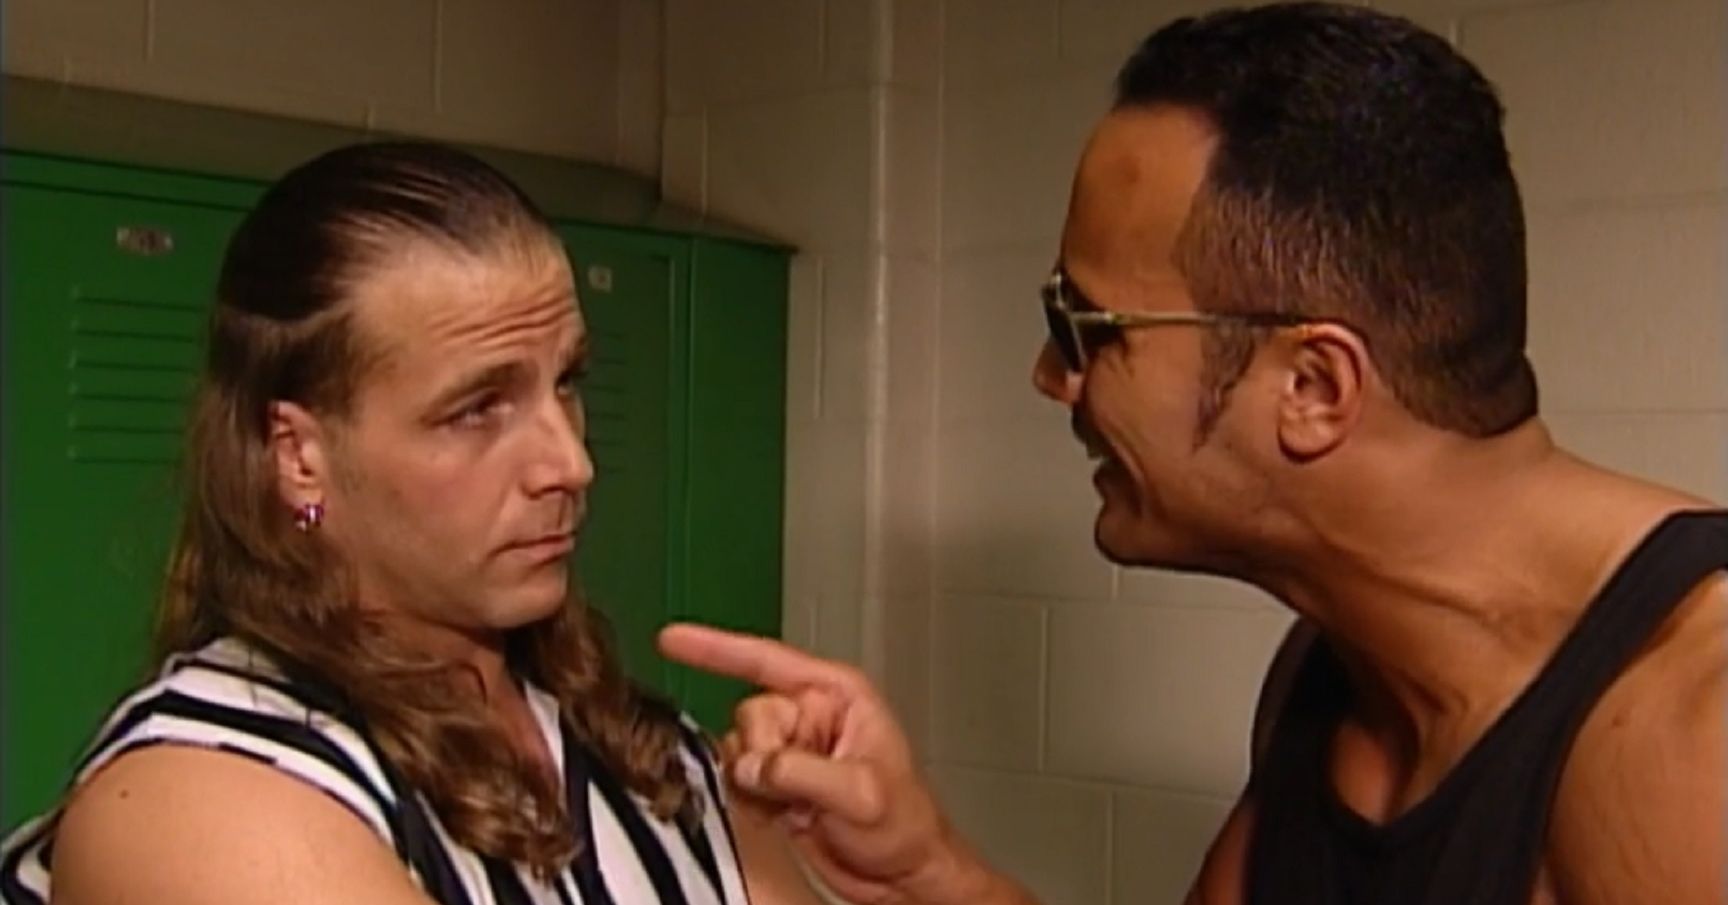 Shawn Michaels and The Rock backstage in WWE